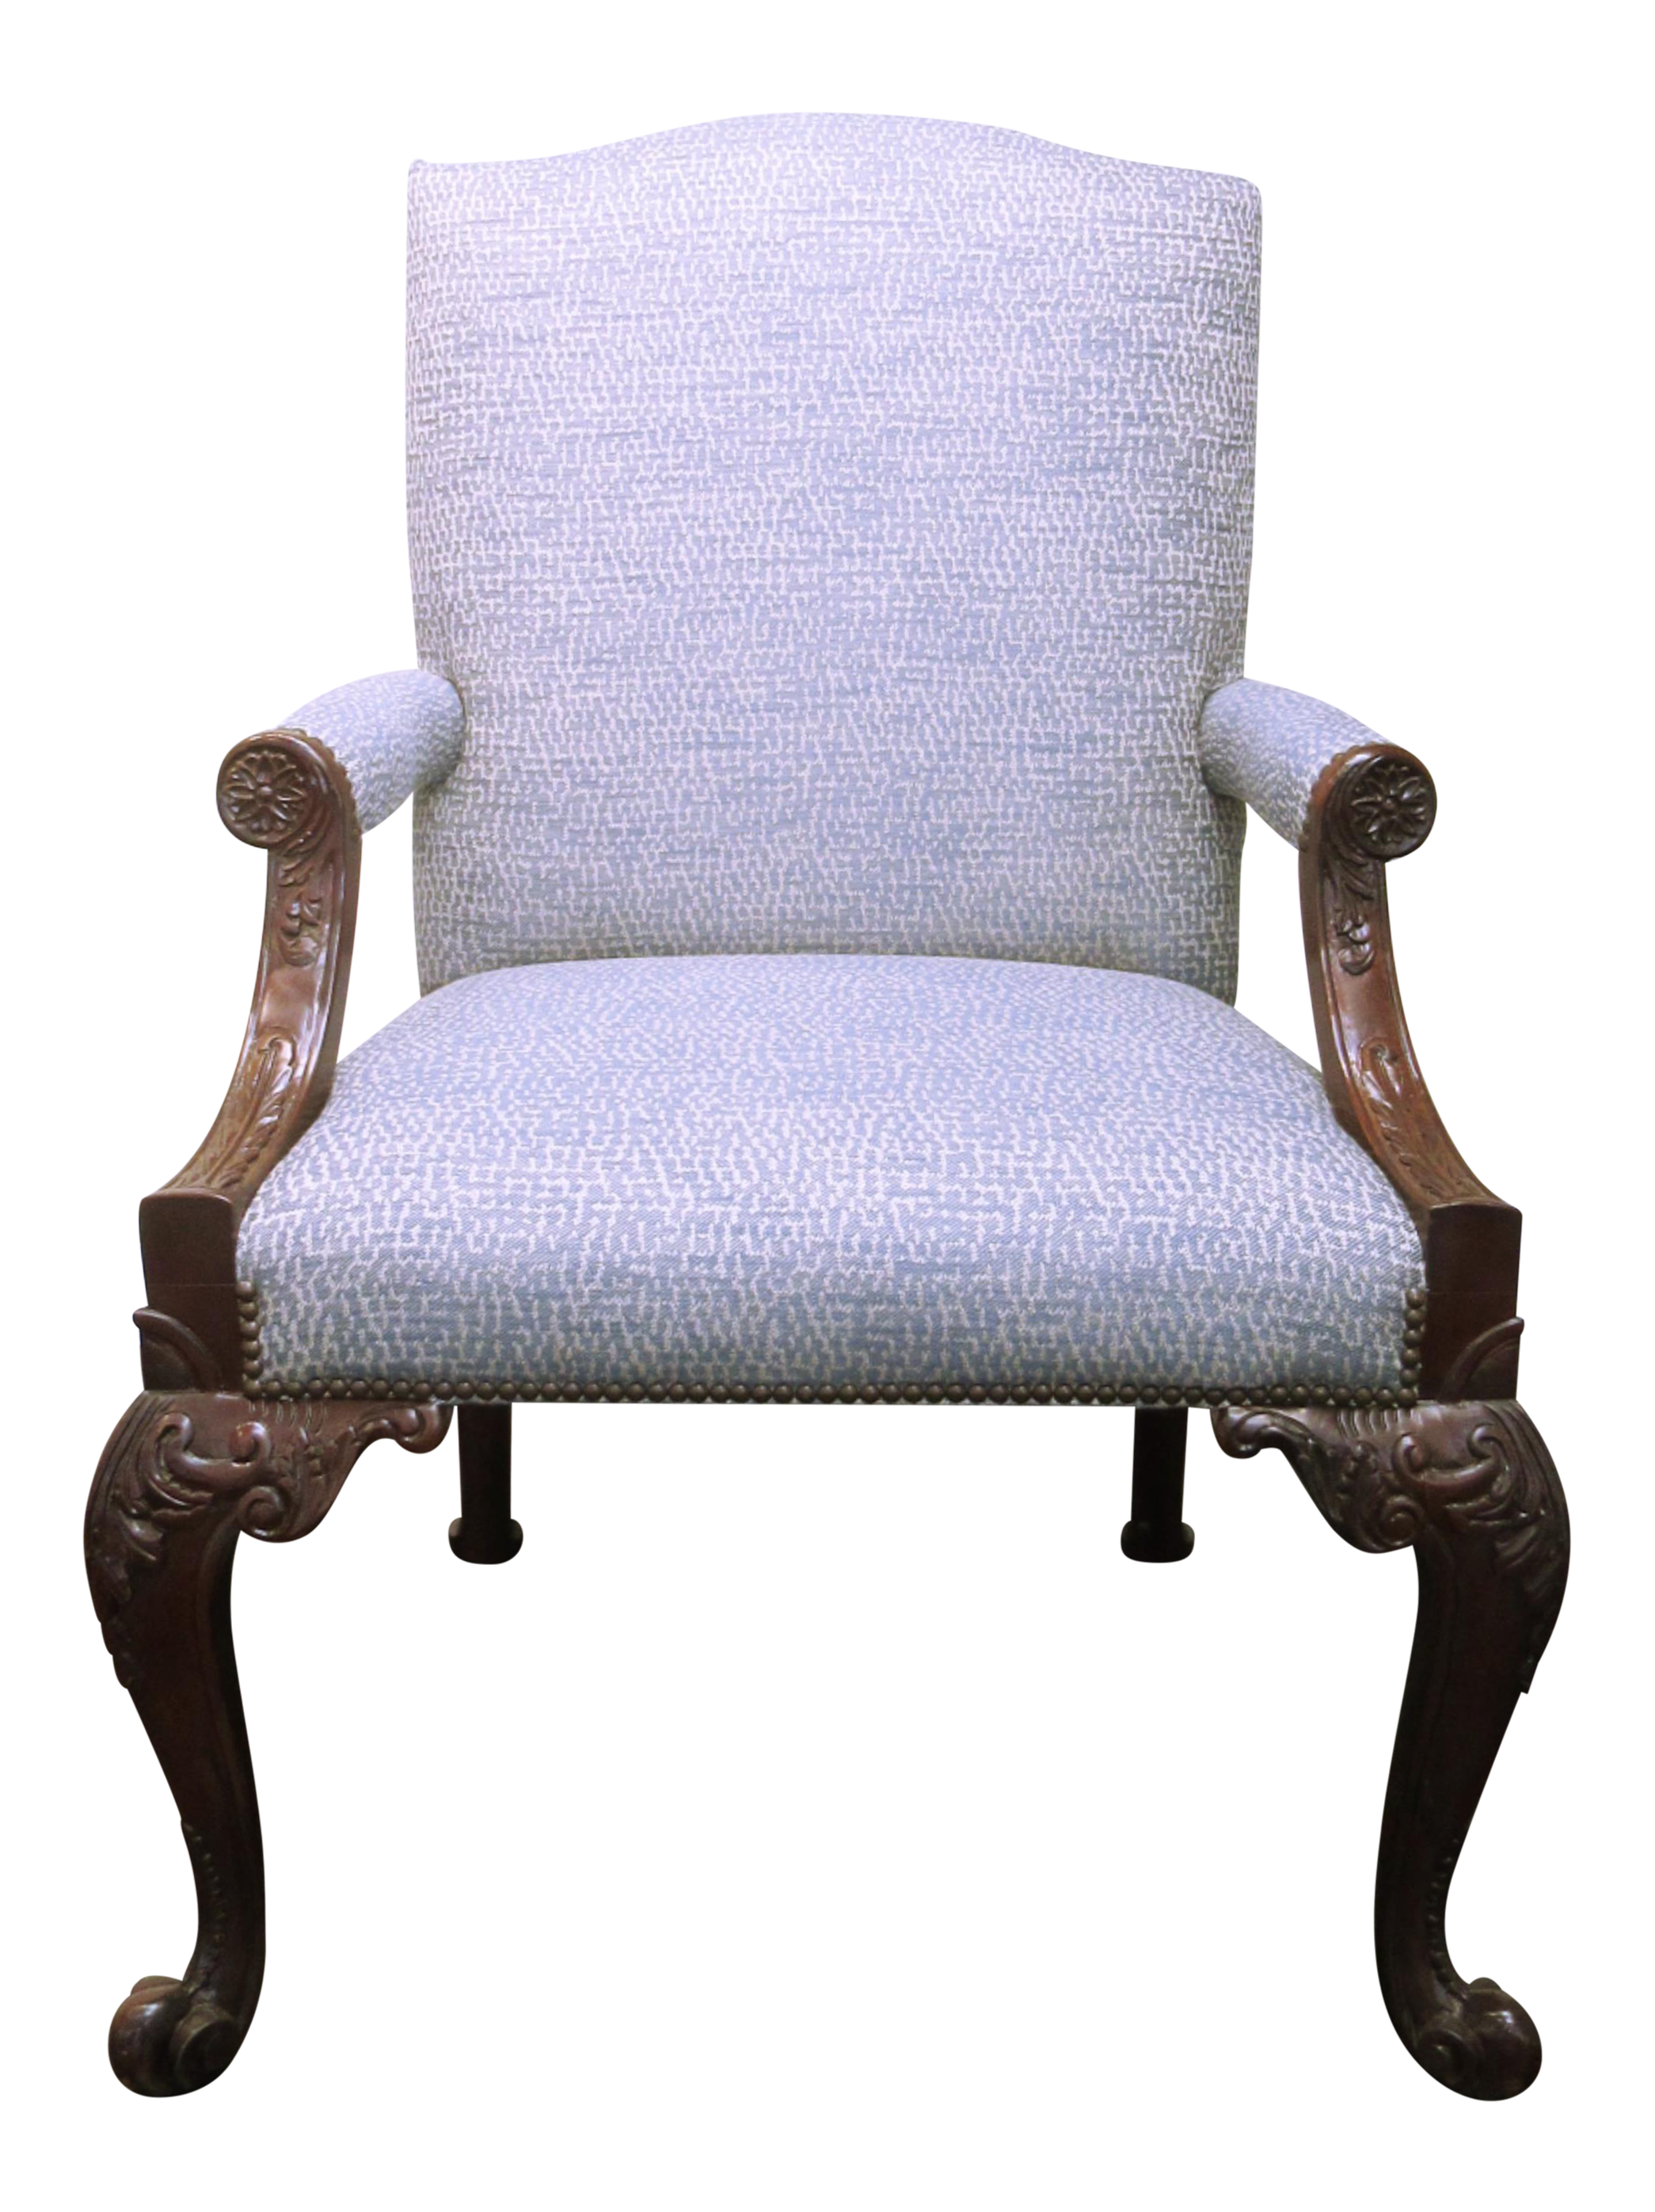 Gainsborough Chair Image Free Download PNG HD PNG Image